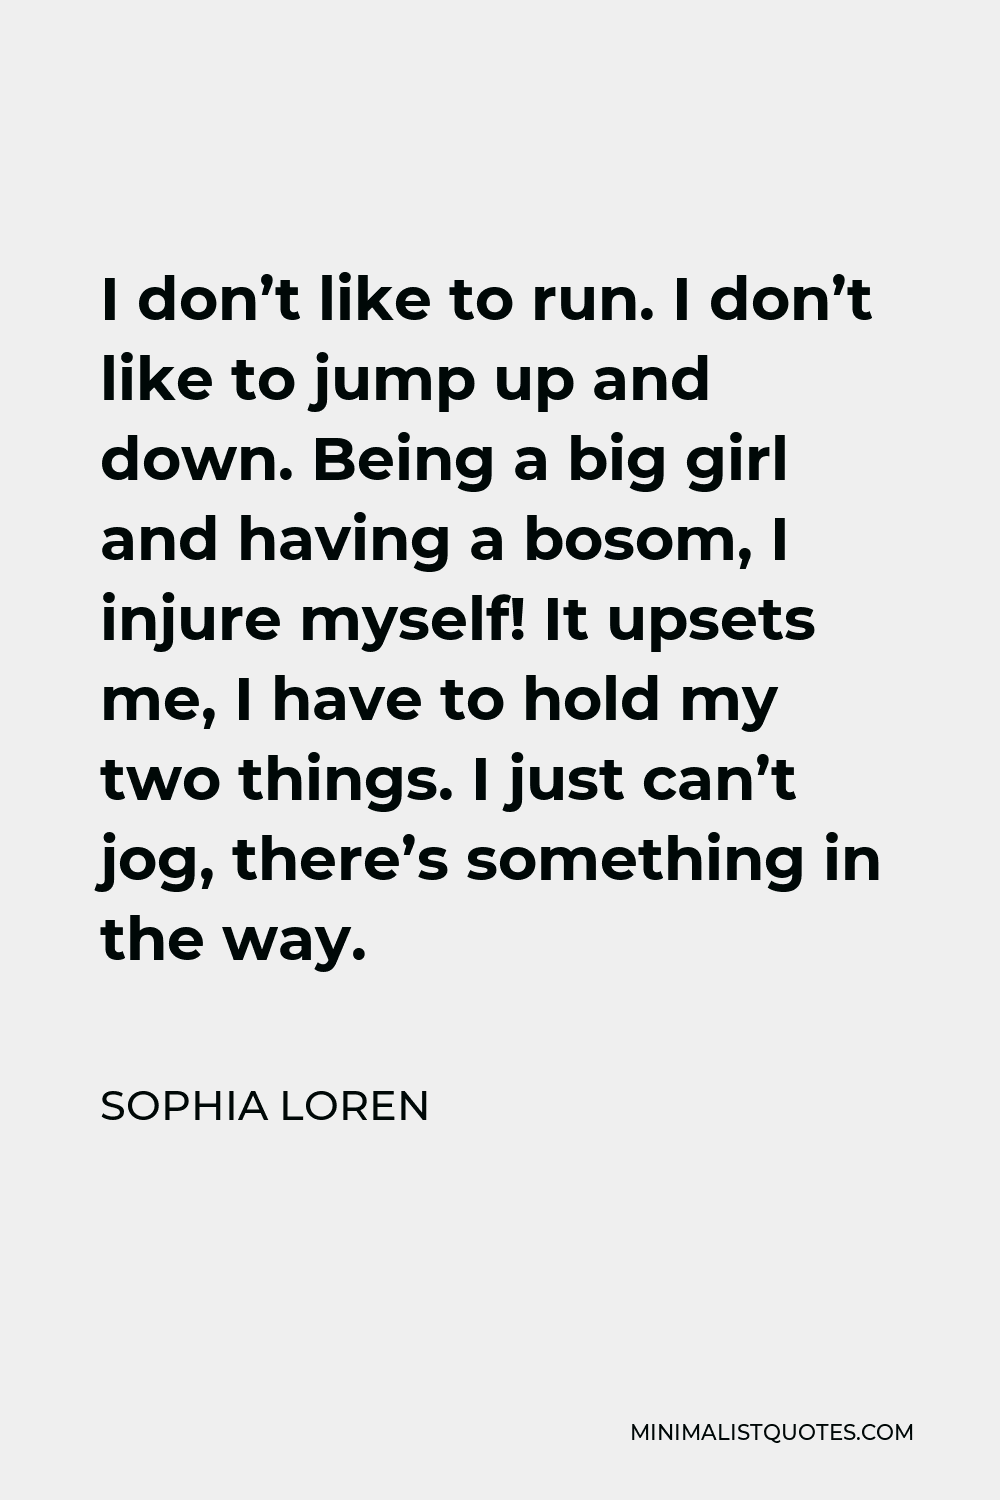 Sophia Loren Quote - I don’t like to run. I don’t like to jump up and down. Being a big girl and having a bosom, I injure myself! It upsets me, I have to hold my two things. I just can’t jog, there’s something in the way.